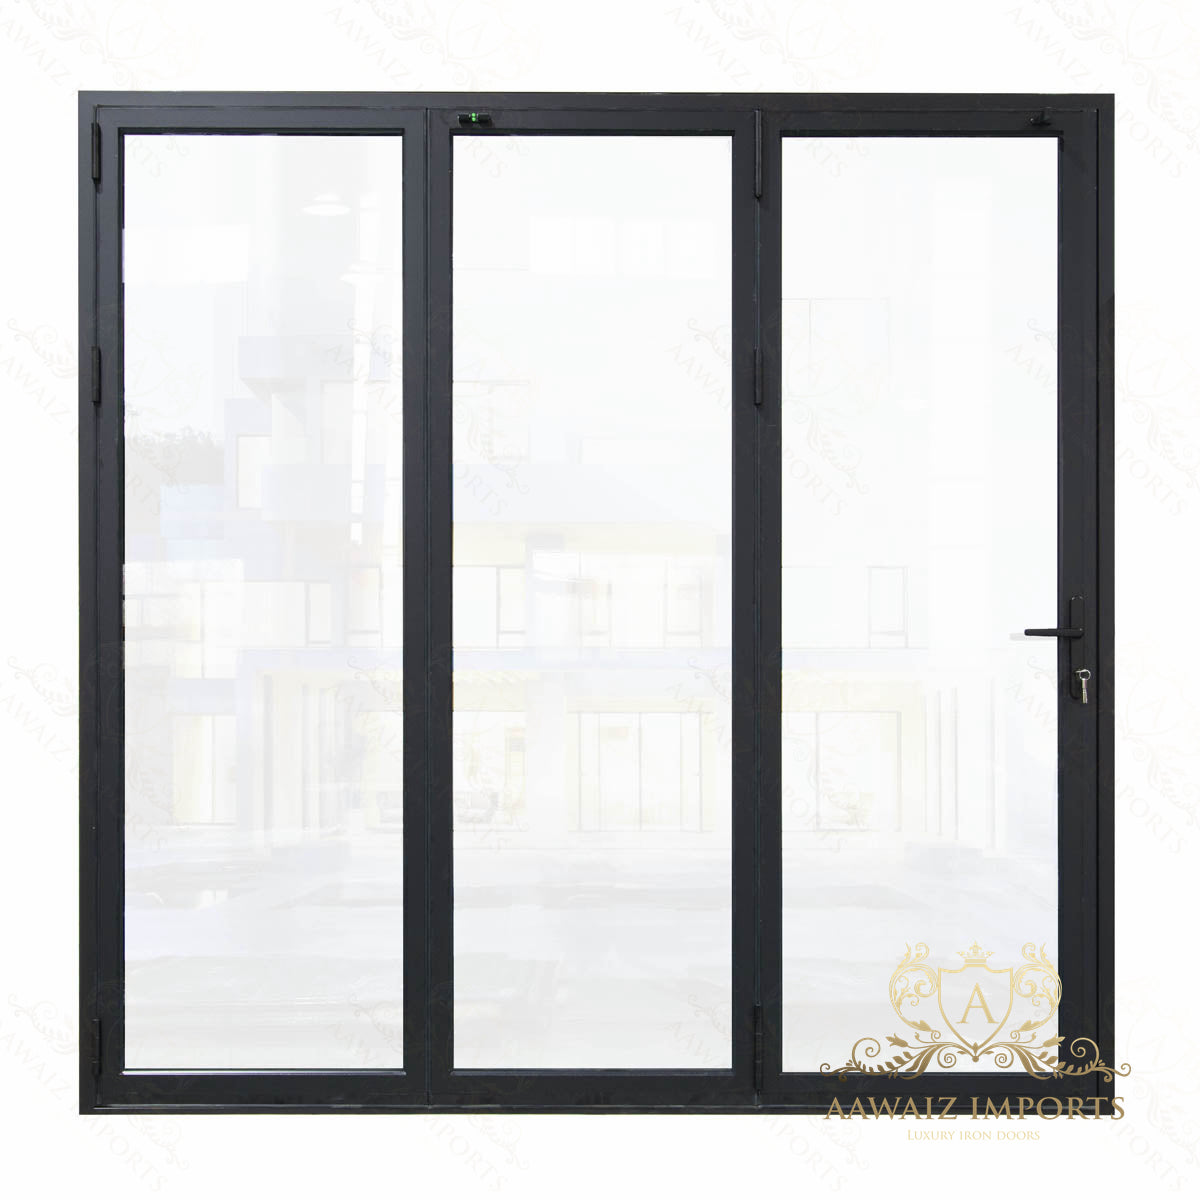 9 Ft Wide By 9 Ft Tall (108" By 108") Aluminum Bi Fold Patio Door Outswing Thermal Break Insulated Matt Black Finish